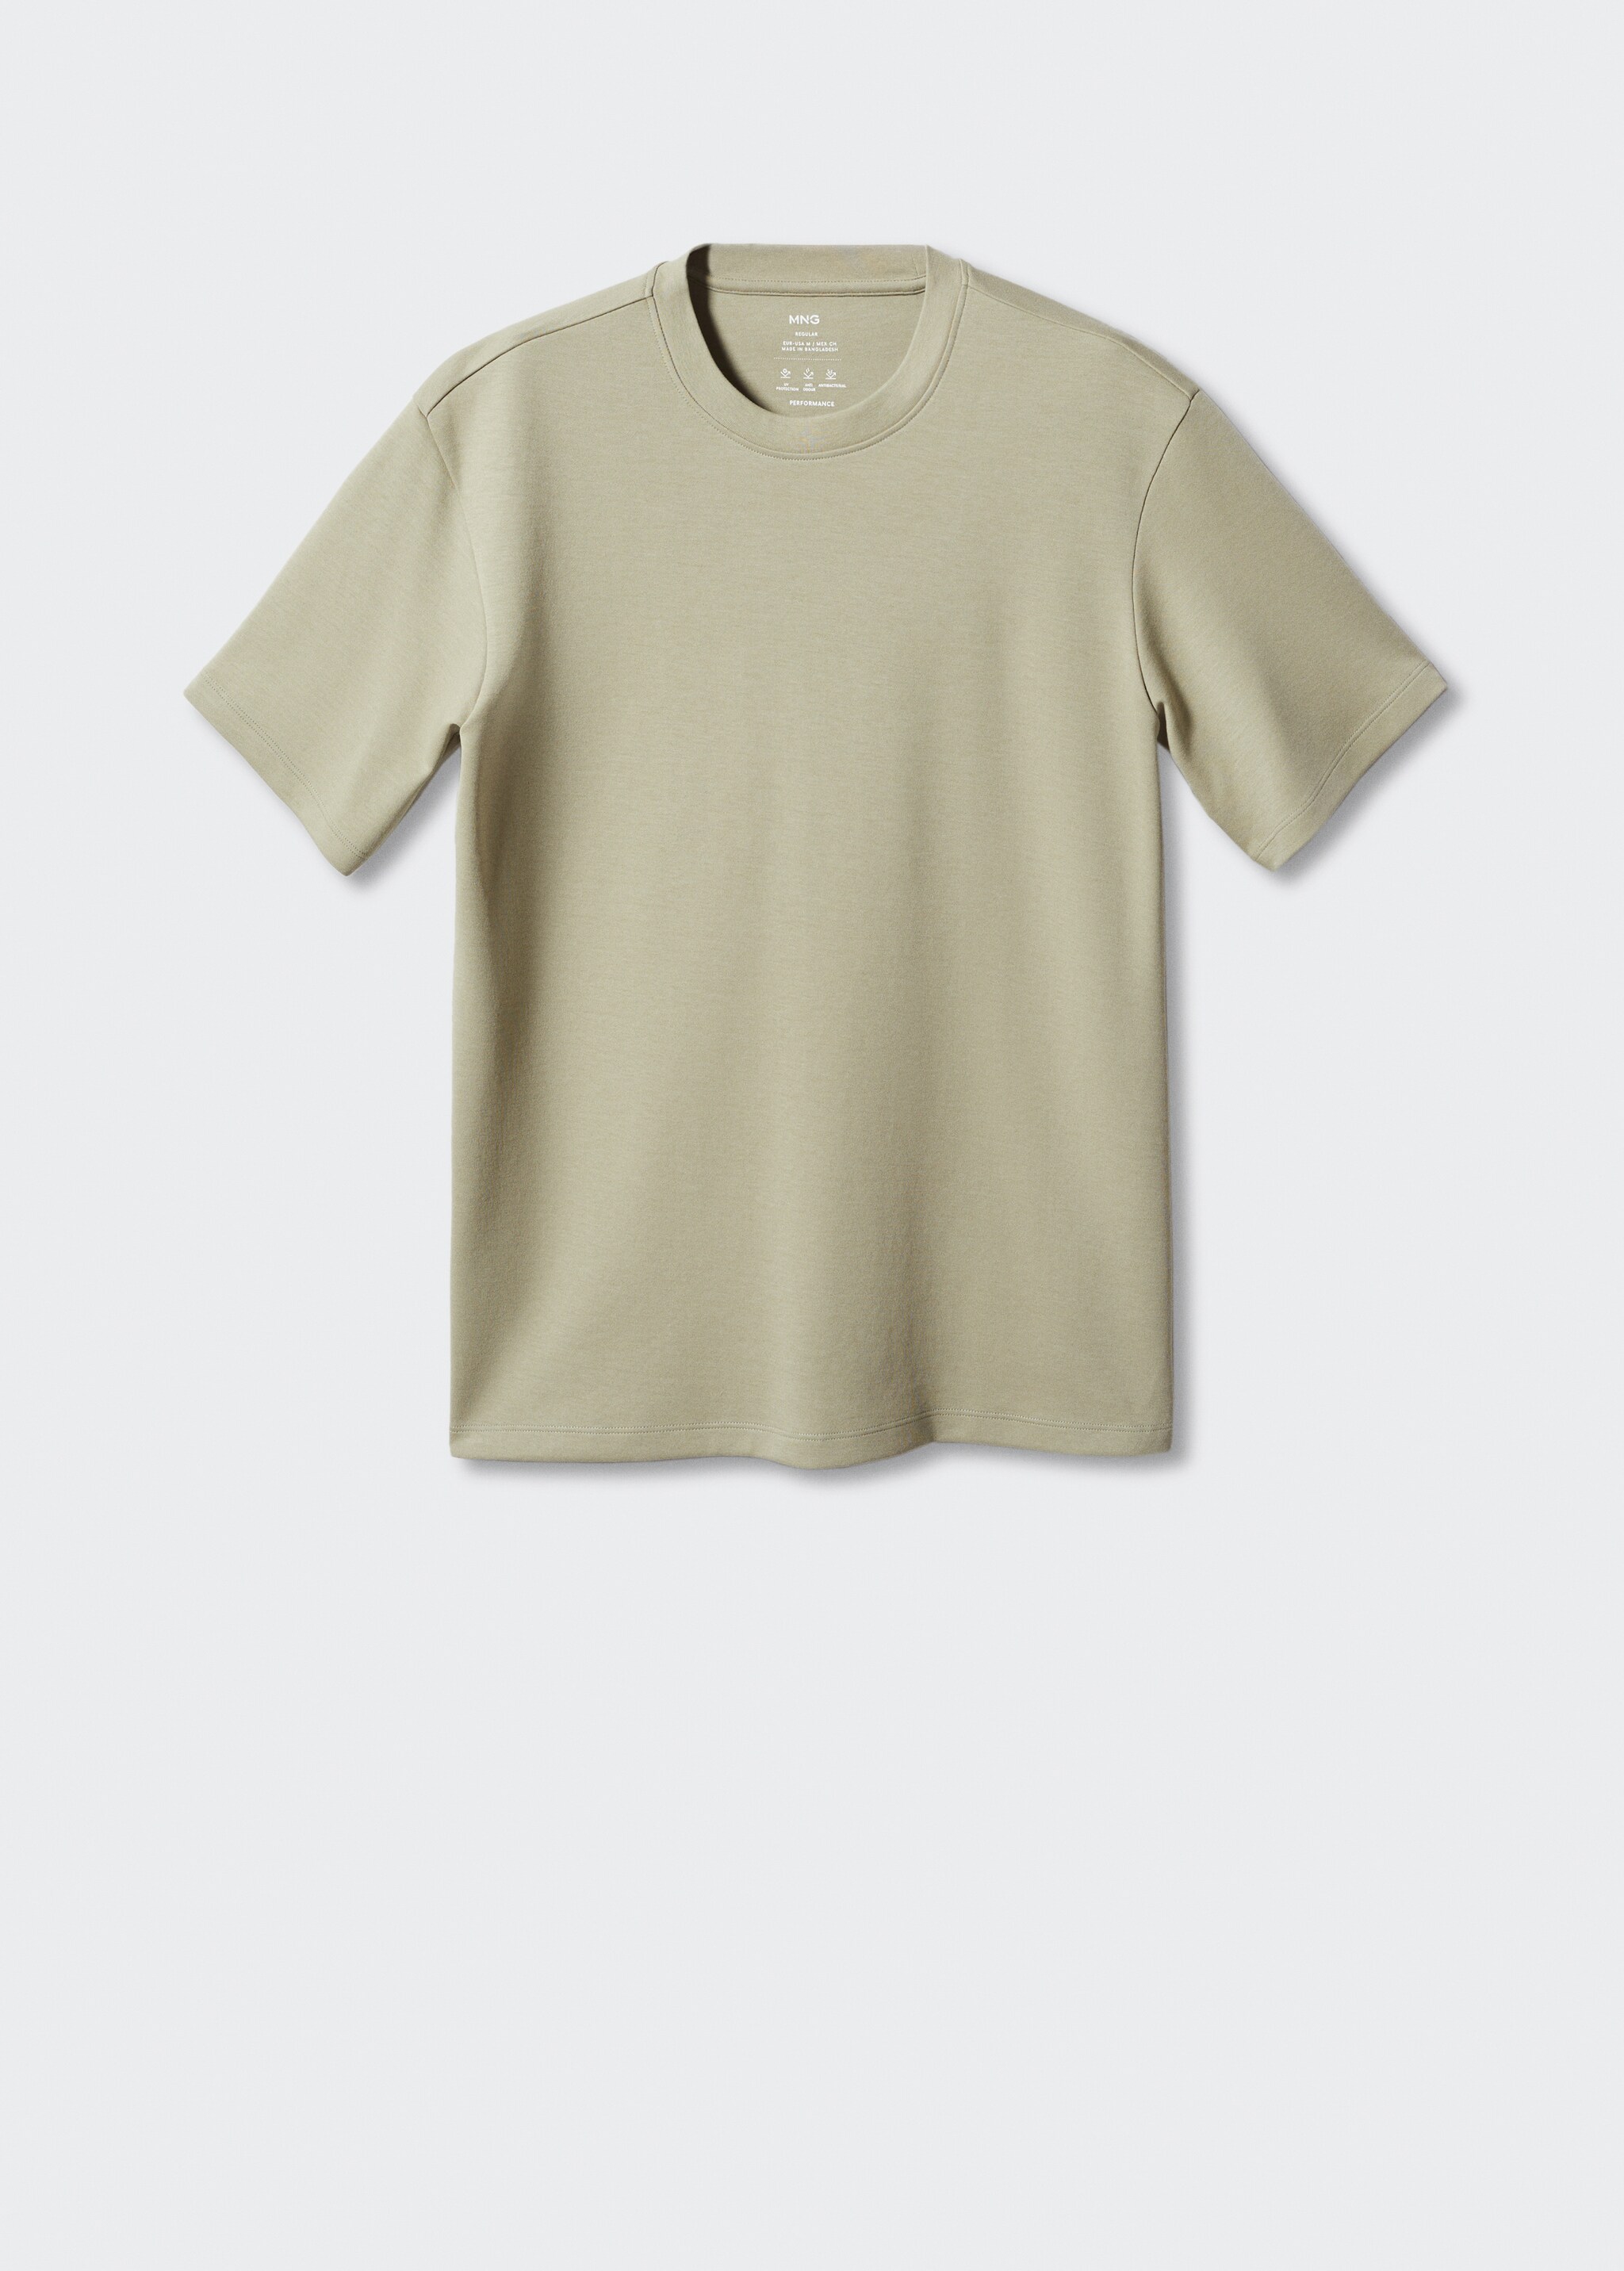 Breathable cotton t-shirt - Article without model